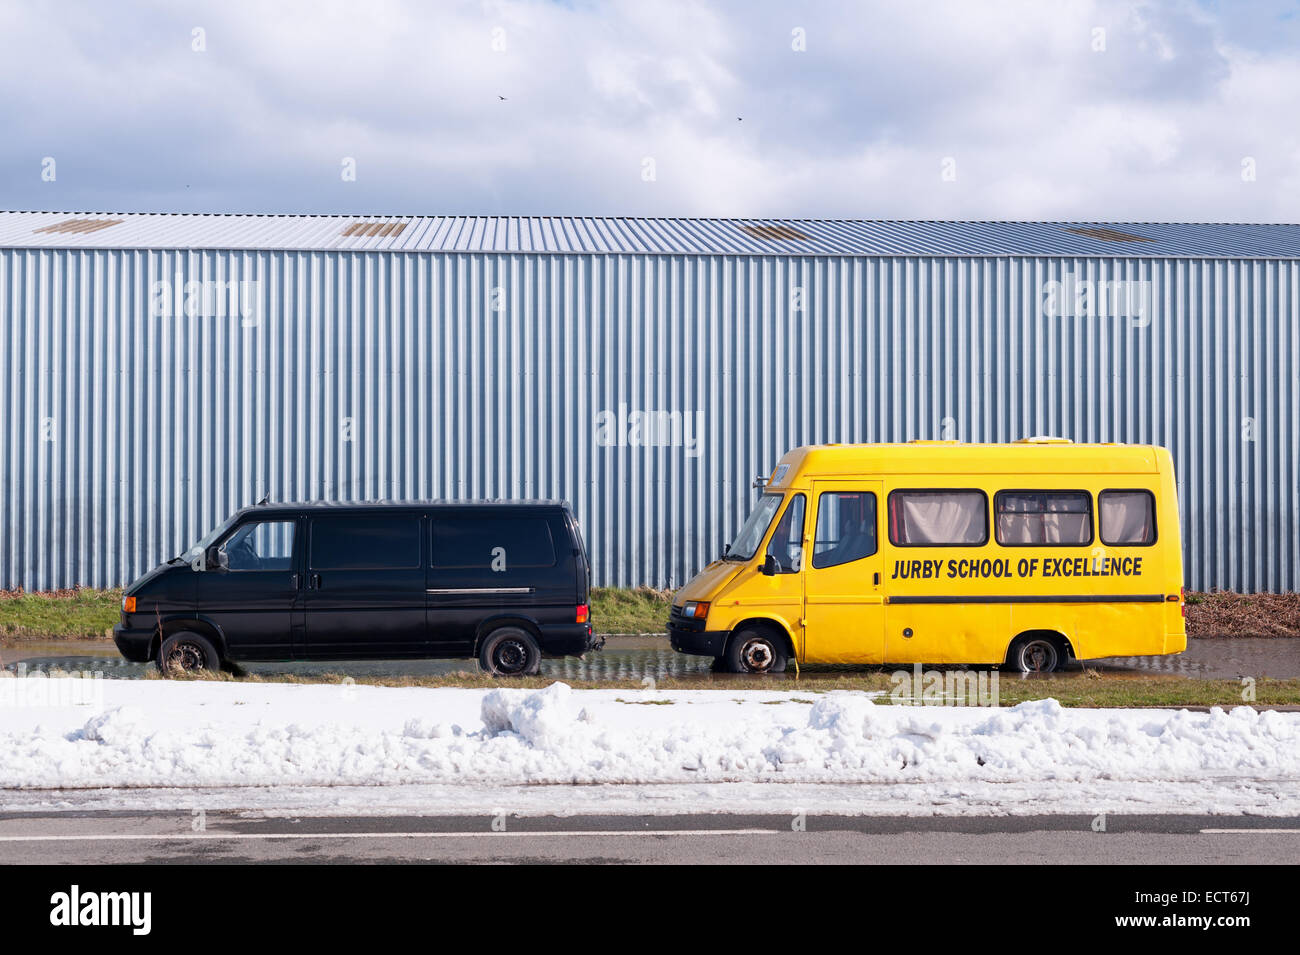 Isle of Man - Jurby School of Excellence - old mini bus parked in a large puddle Stock Photo